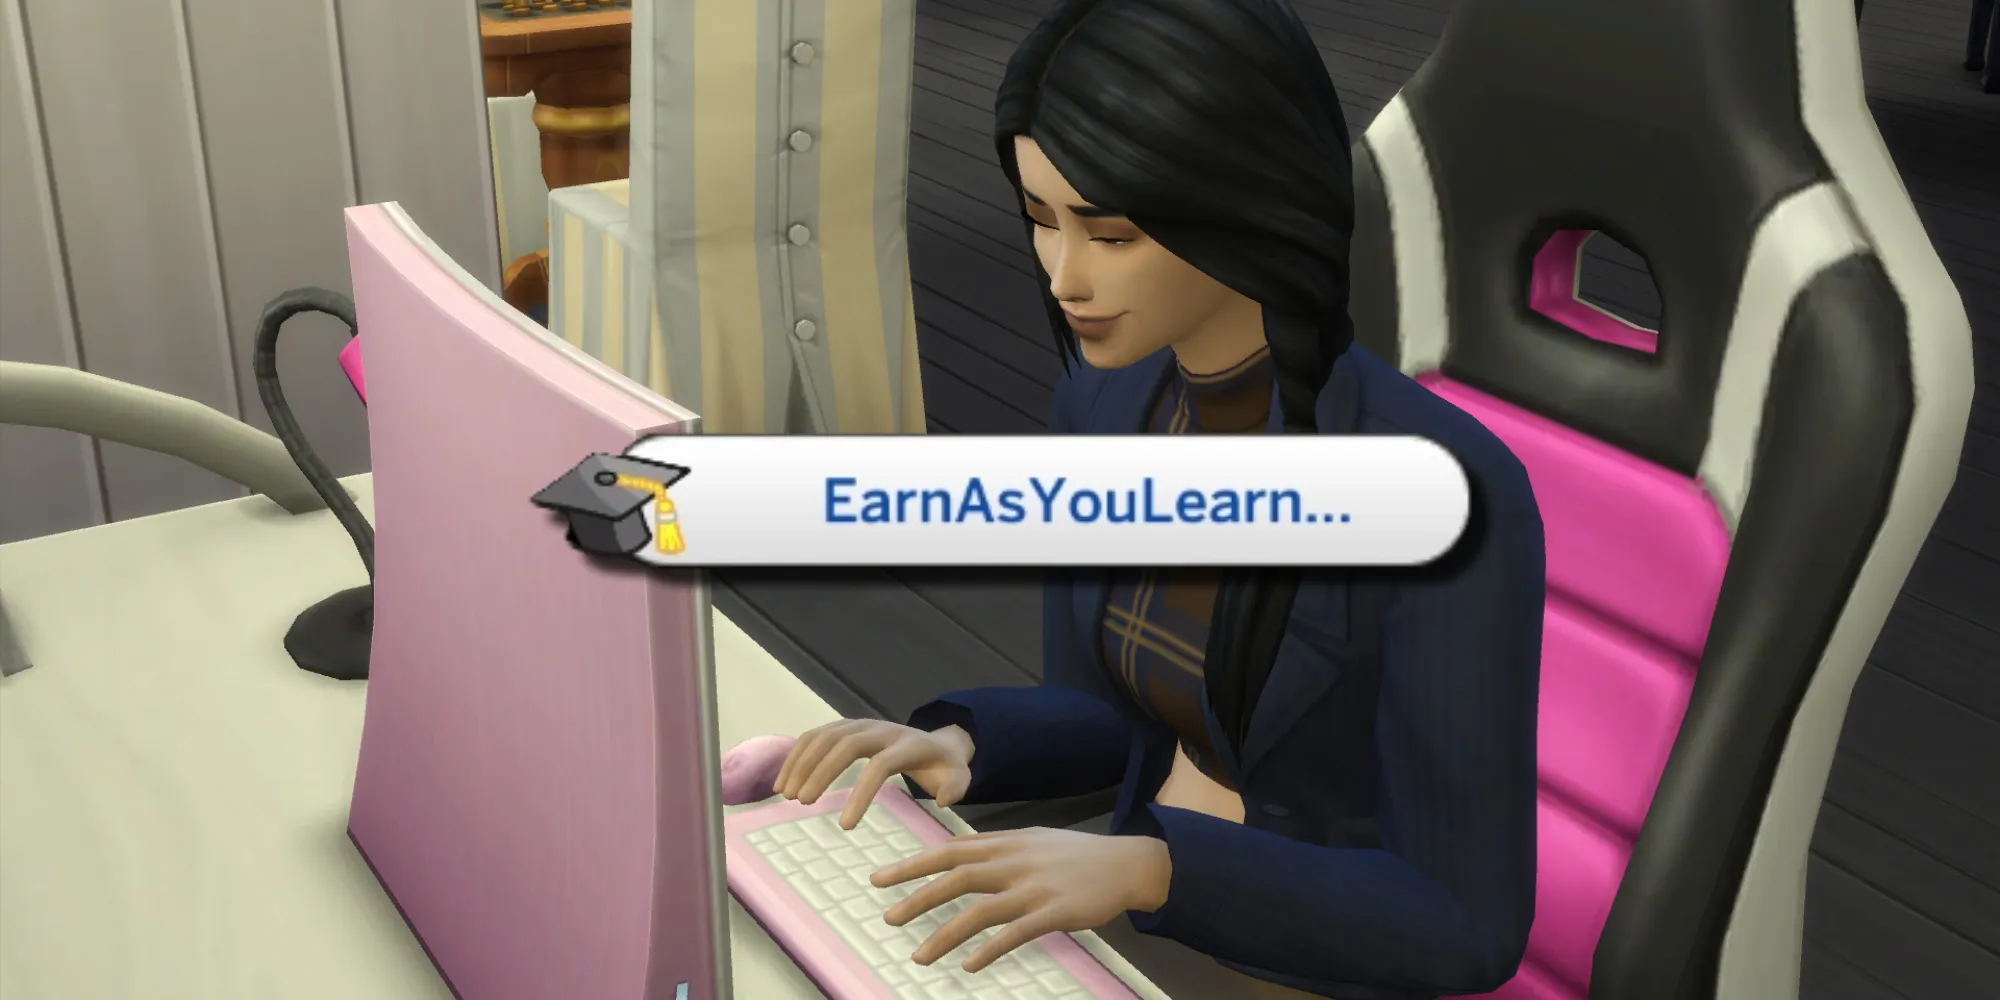 Study skills for careers online with the Earn As You Learn Online Apprenticeship Mod for The Sims 4.